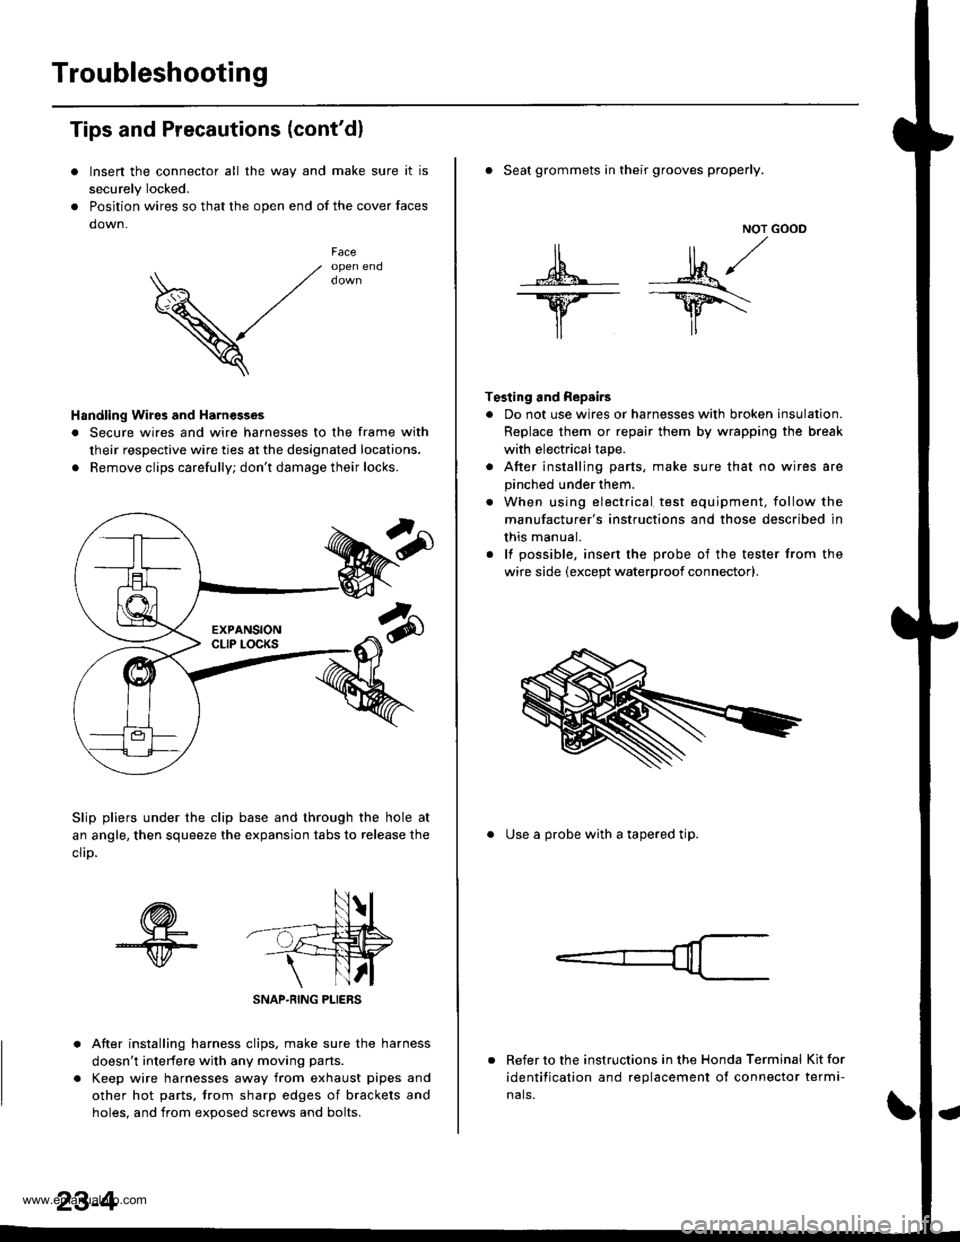 HONDA CR-V 1997 RD1-RD3 / 1.G Workshop Manual 
Troubleshooting
Tips and Precautions (contdl
Insen the connector all the way and make sure it is
securely Iocked.
Position wires so that the open end of the cover faces
down.
V
Faceopen end
Handling